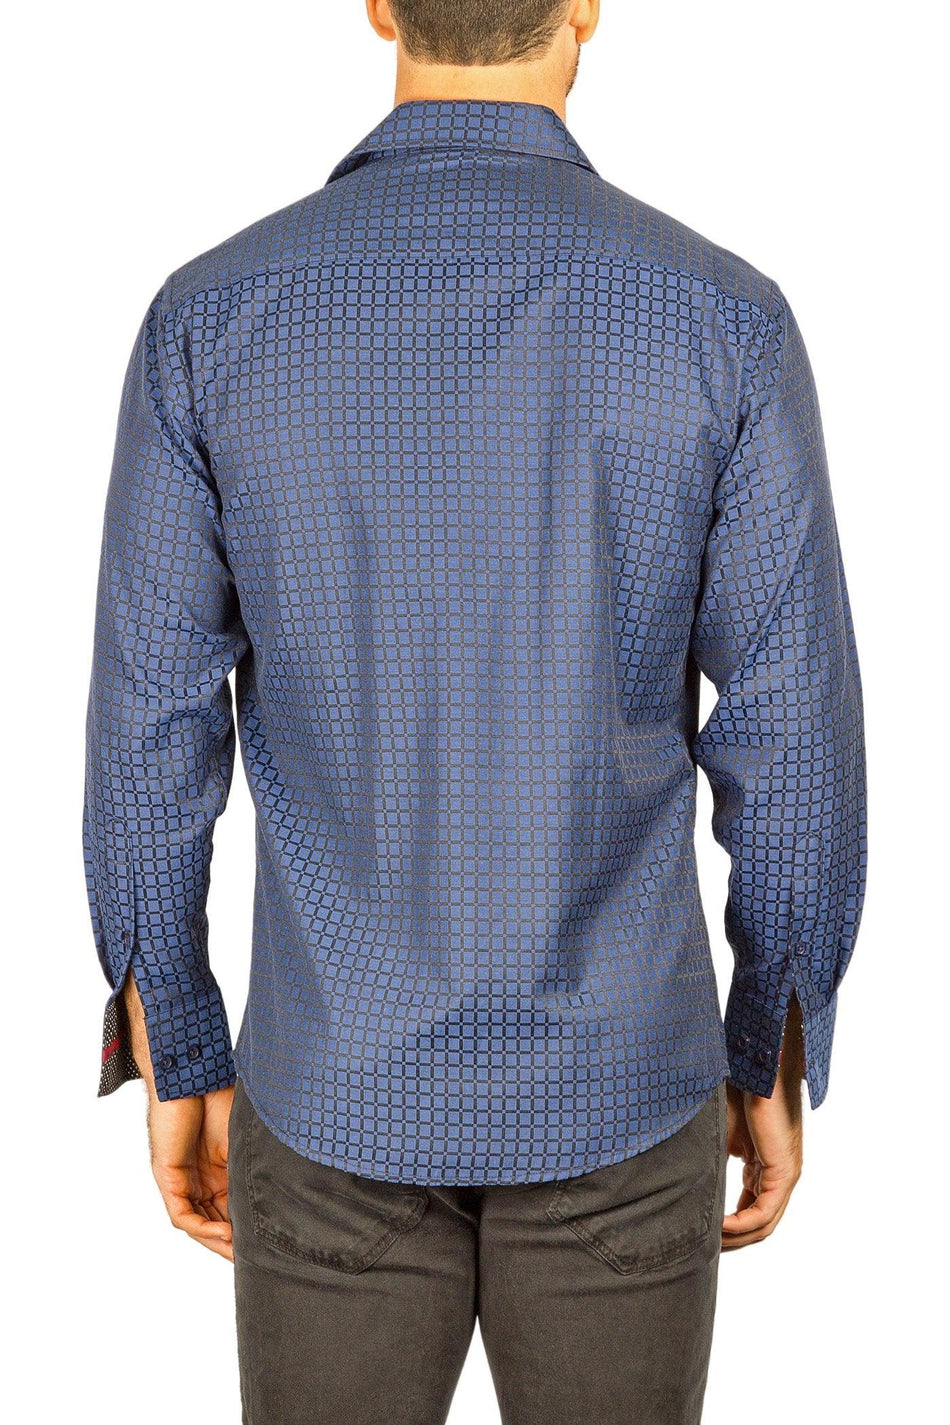 Men's Modern Fit Cotton Button Up Navy Square Pattern